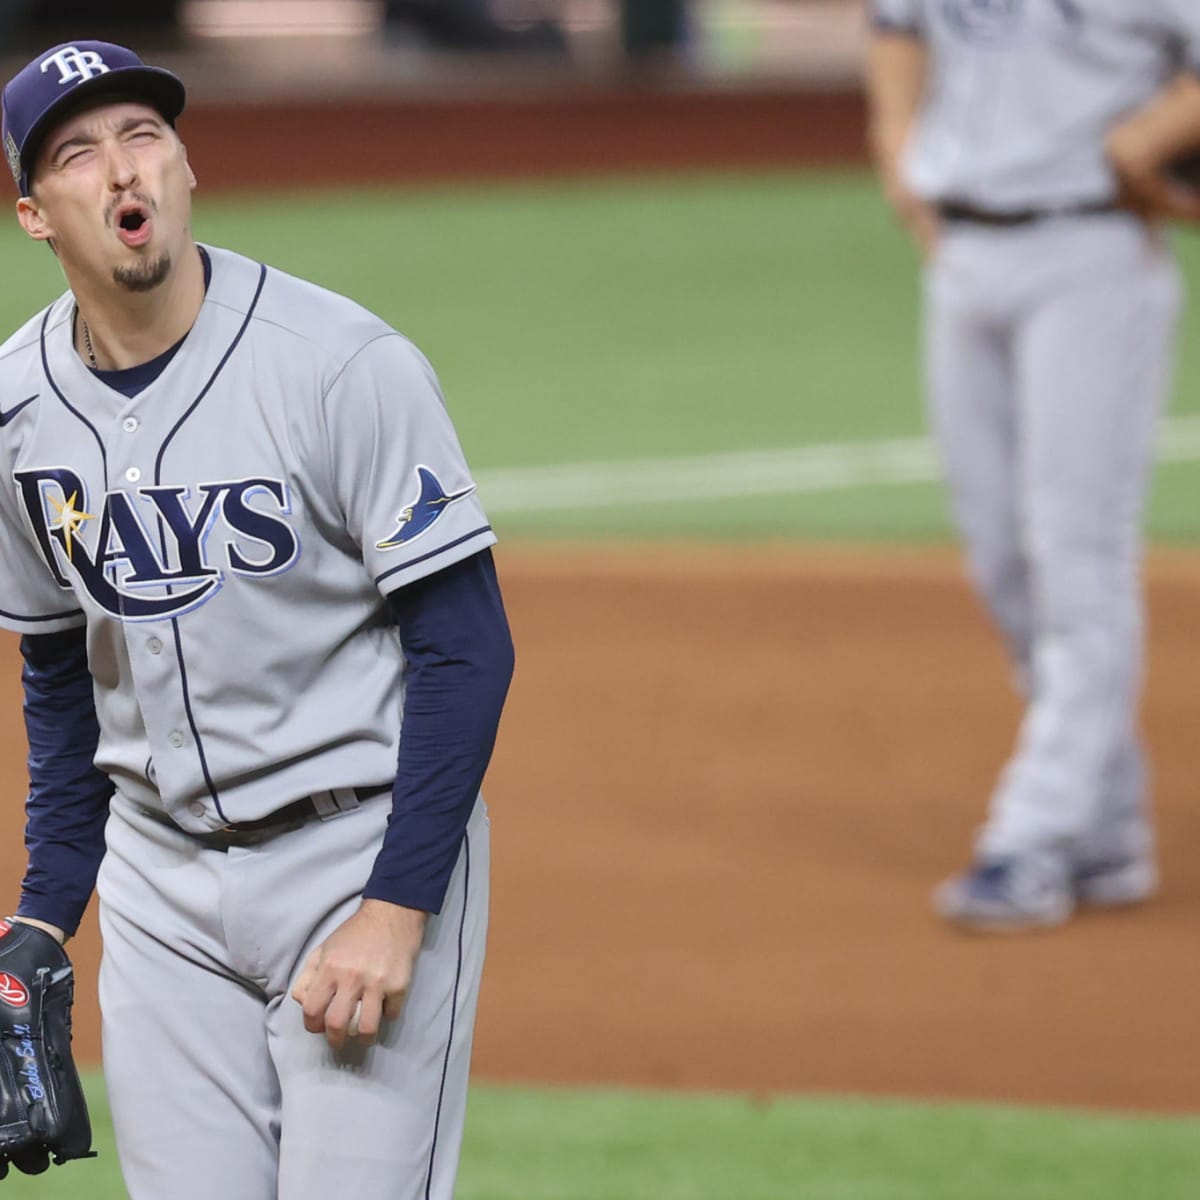 Shoreline Area News: After being pulled in the 6th inning of baseball's  World Series, Blake Snell is fired up for next year